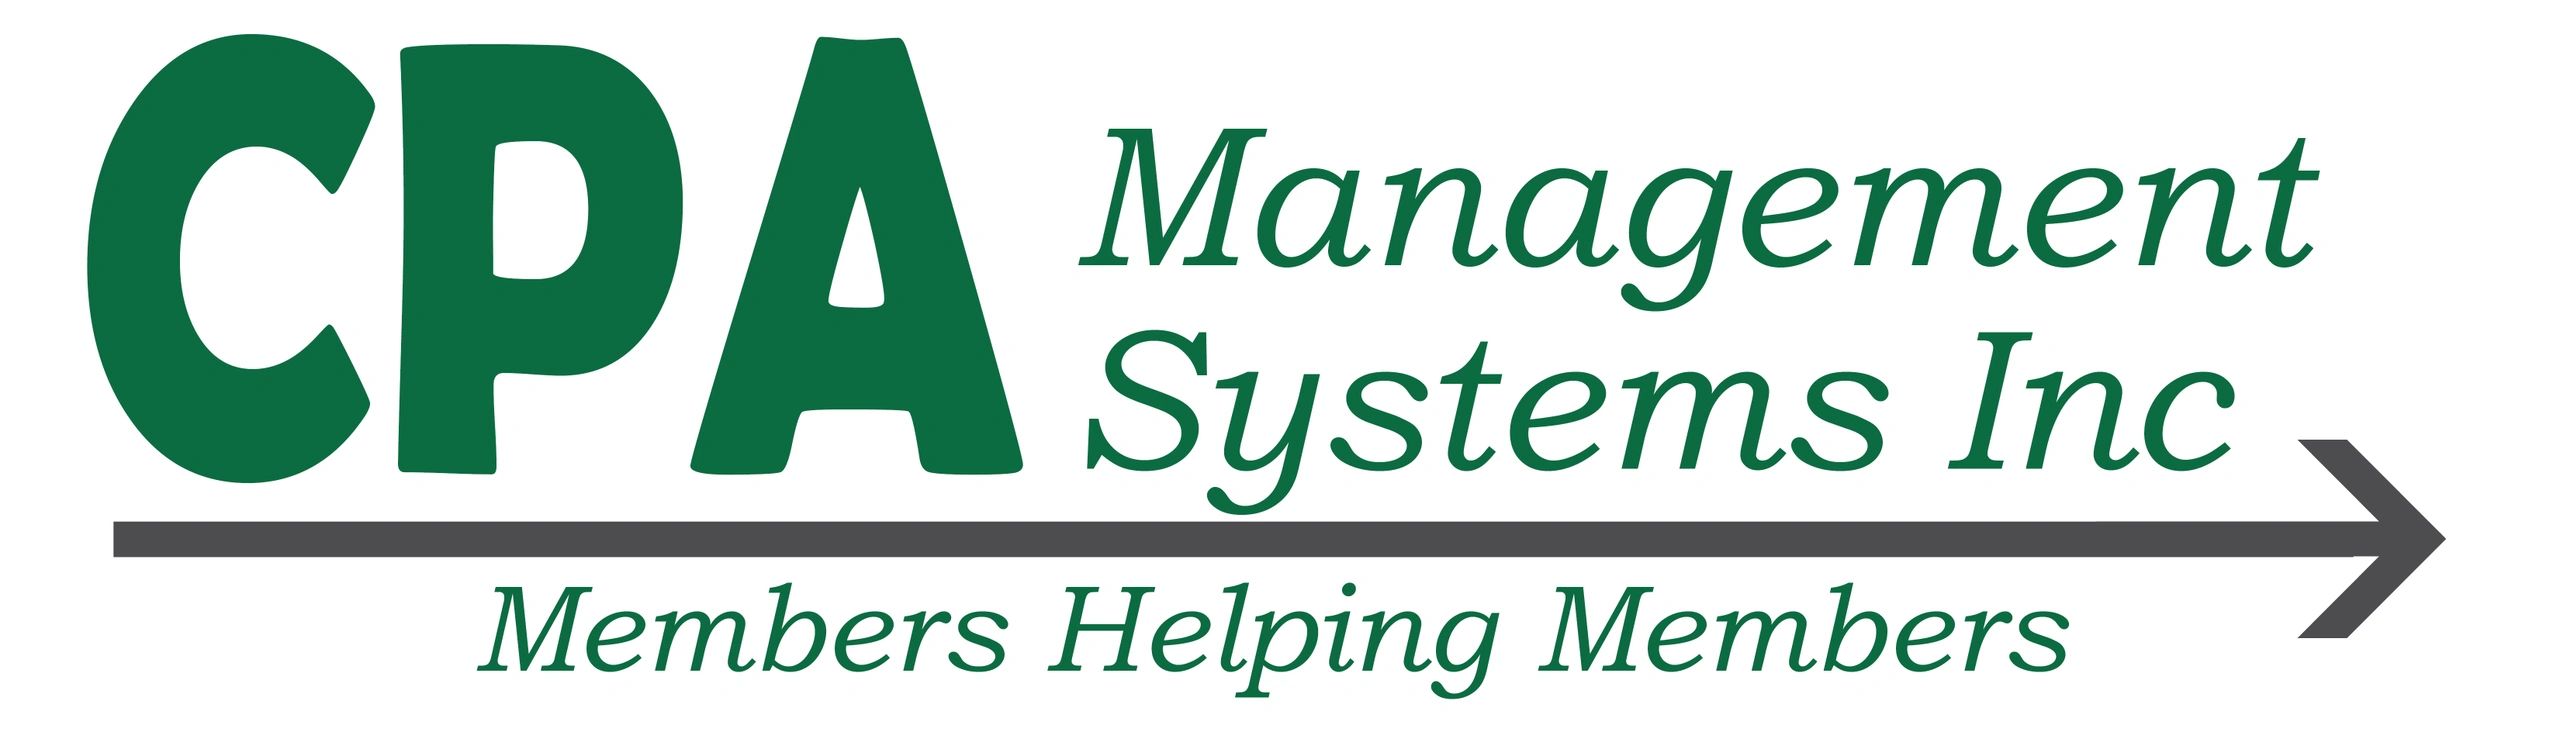 CPA Management Systems, Inc. - Association of Accounting Firms